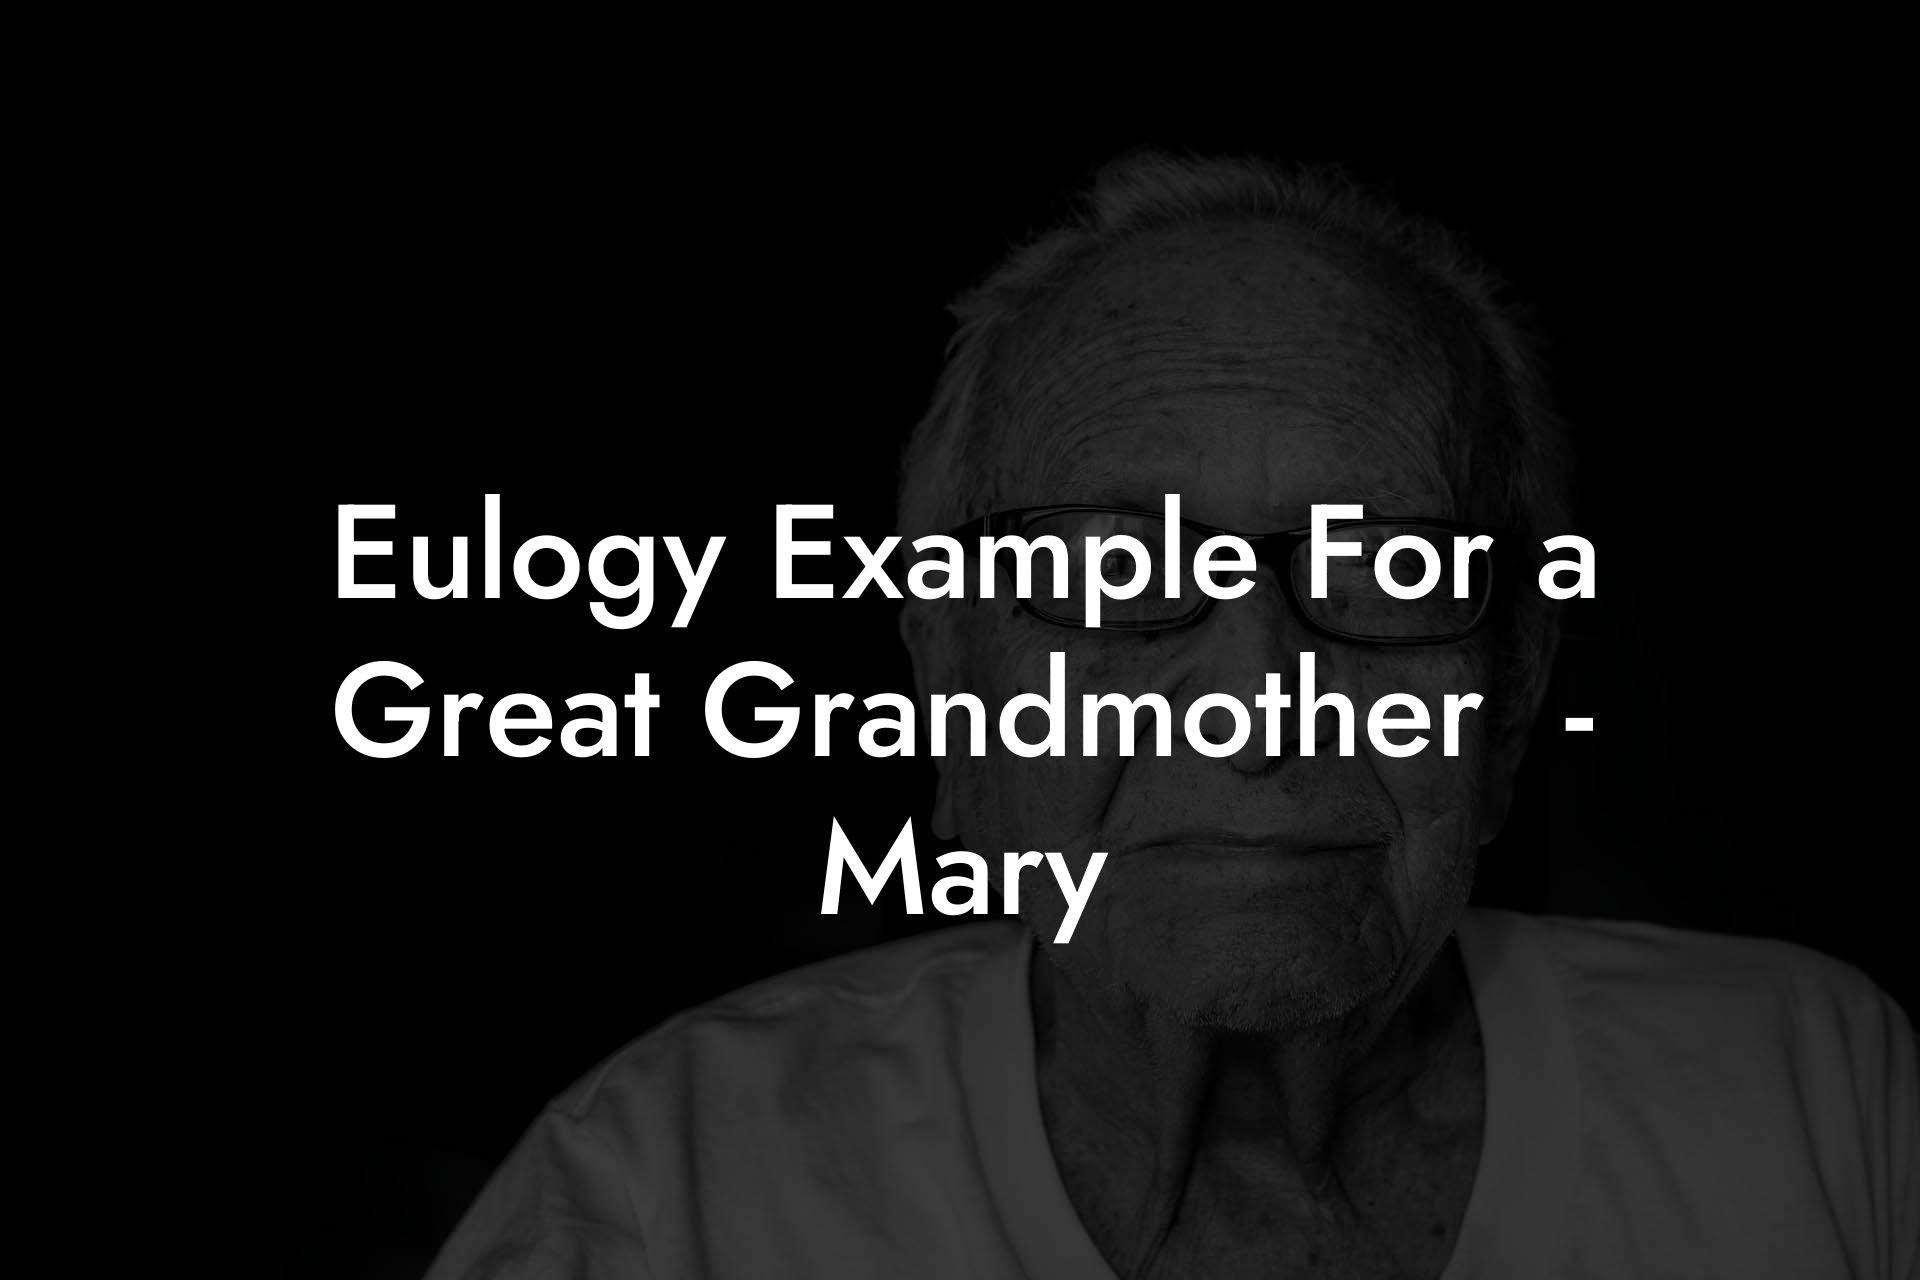 Eulogy Example For a Great Grandmother  - Mary